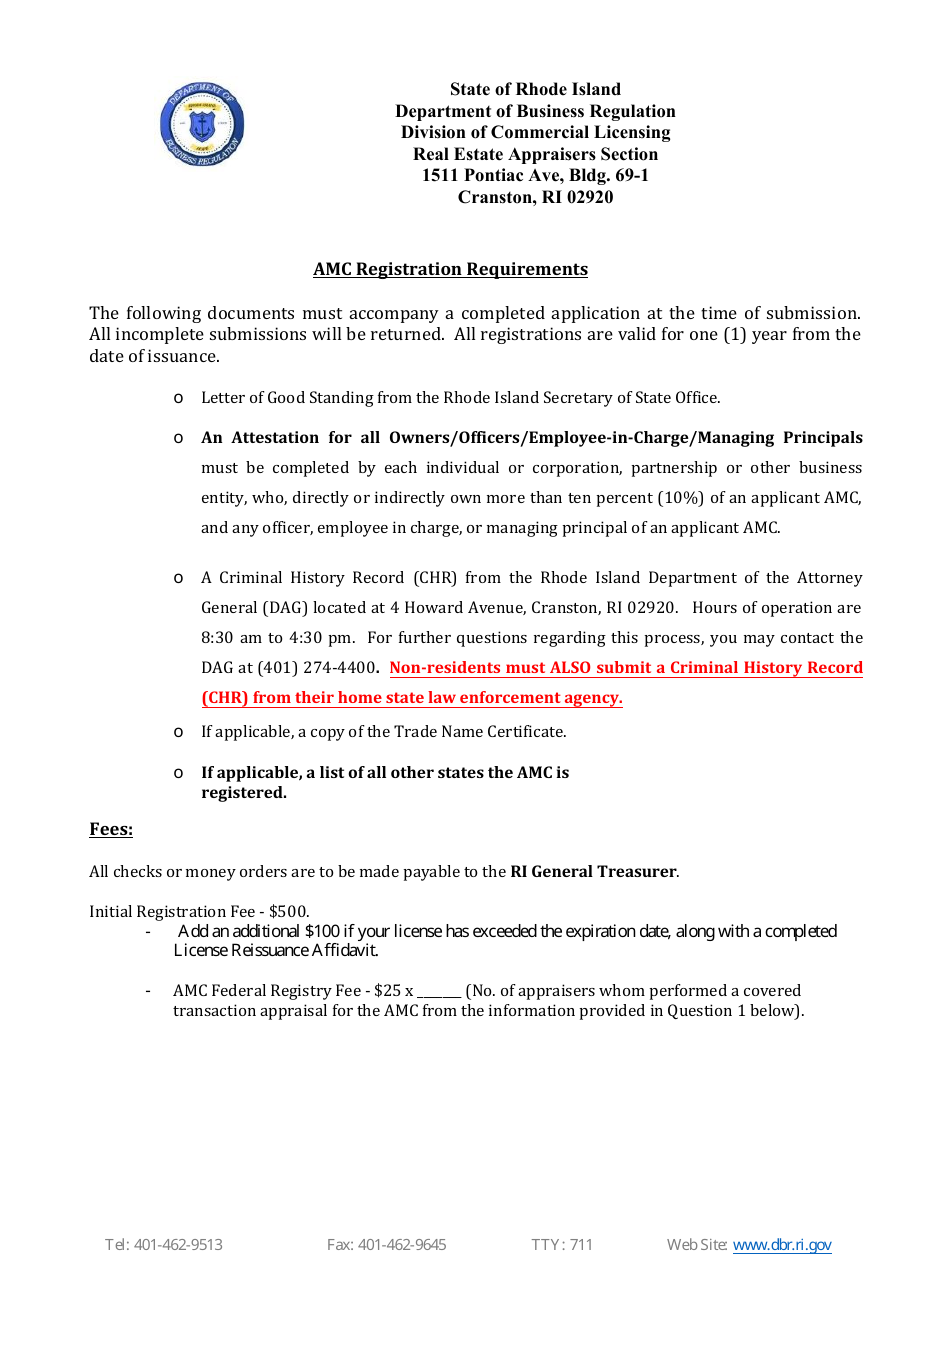 Appraisal Management Company (AMC) Initial / Annual Registration Application - Rhode Island, Page 1